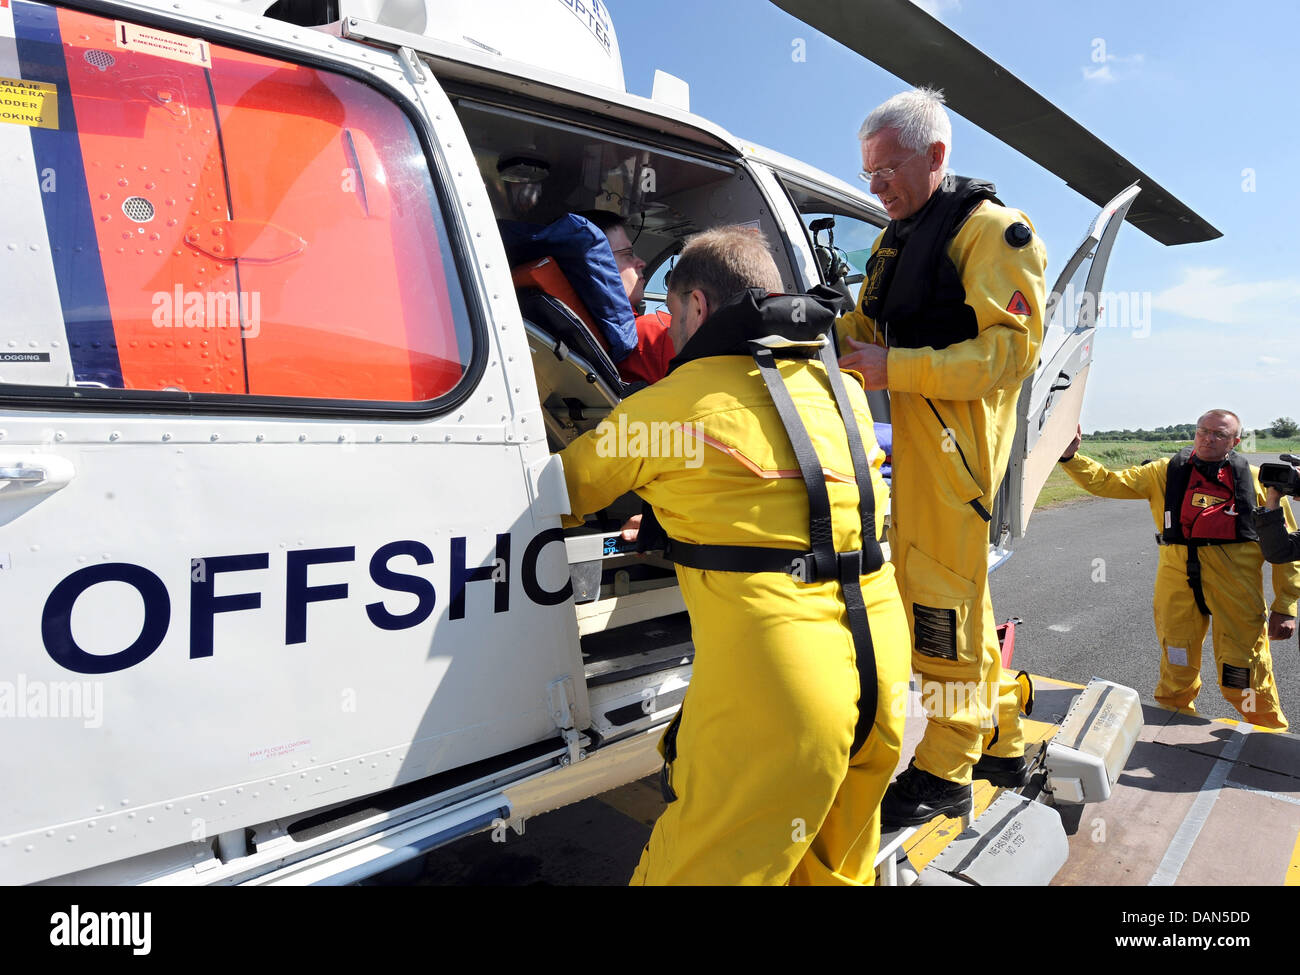 A helicopter of the model Eurocopter SA 365, that is specially equipped for offshore rescue missions, is prepared for take off prior to a demonstration flight in Emden, Germany, 08 July 2011. The helicopter is the core element of offshore rescue planning, which is conceptualised by wind turbine manufacturer BARD in collaboration with the German Red Cross and the company Northern He Stock Photo